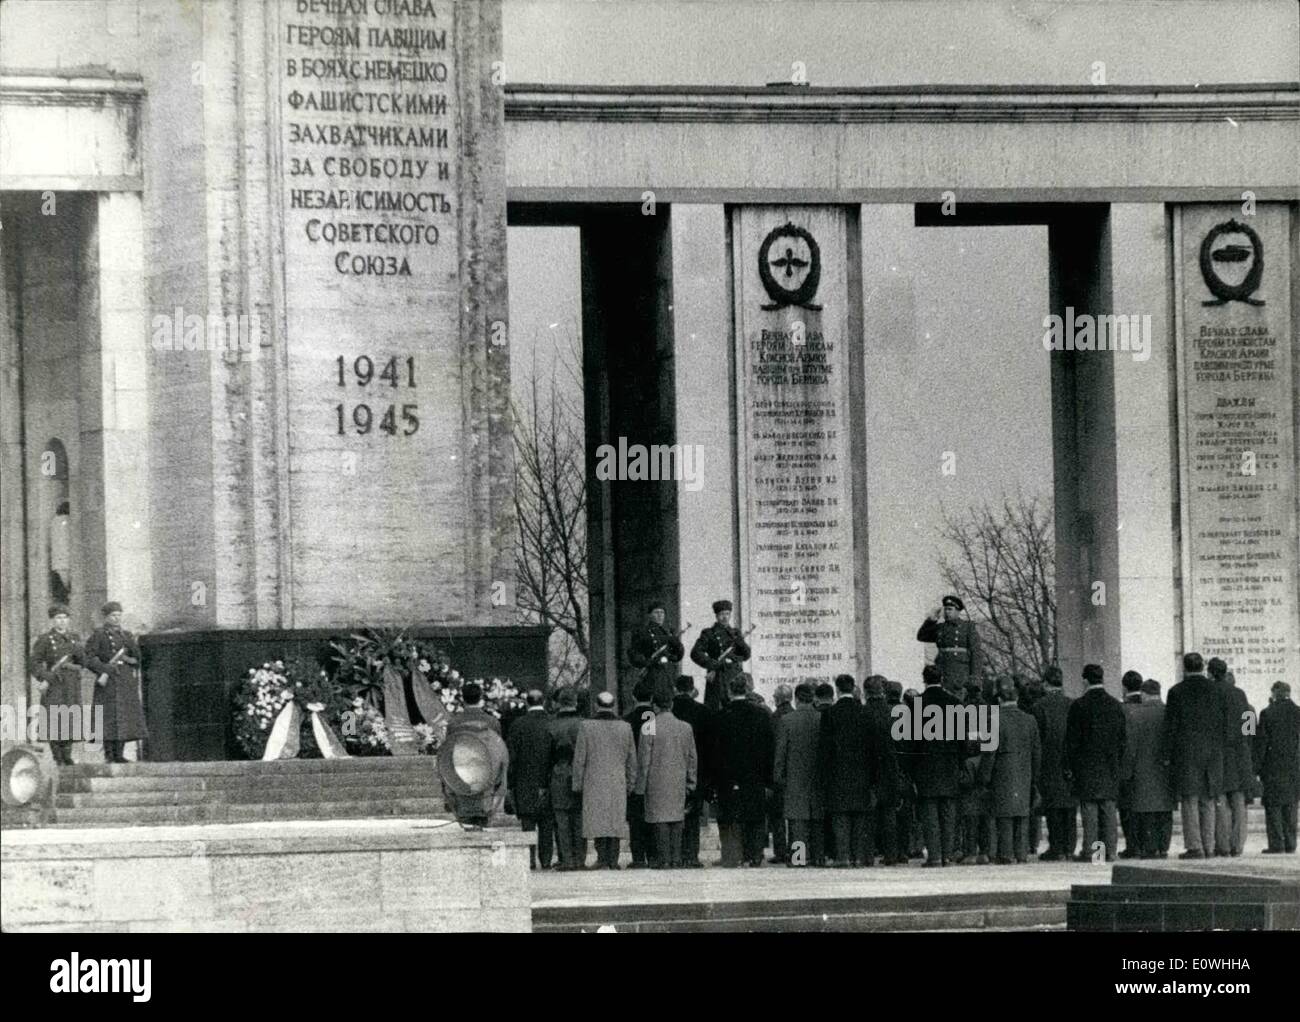 Feb. 02, 1963 - To the 45, memorial day of the Soviet army, today (23.2) delegations from the Soviets and from East Berlin lay down wreathes on the Soviet memorial in West Berlin. Also a honour guard and a music band of the Soviet Army takes part. The Soviets where coming with 6 Busses and much cars over the Check Point Sandkrugbrucke to West Berlin. Photo shows The delegation before the Soviet memorial. Stock Photo